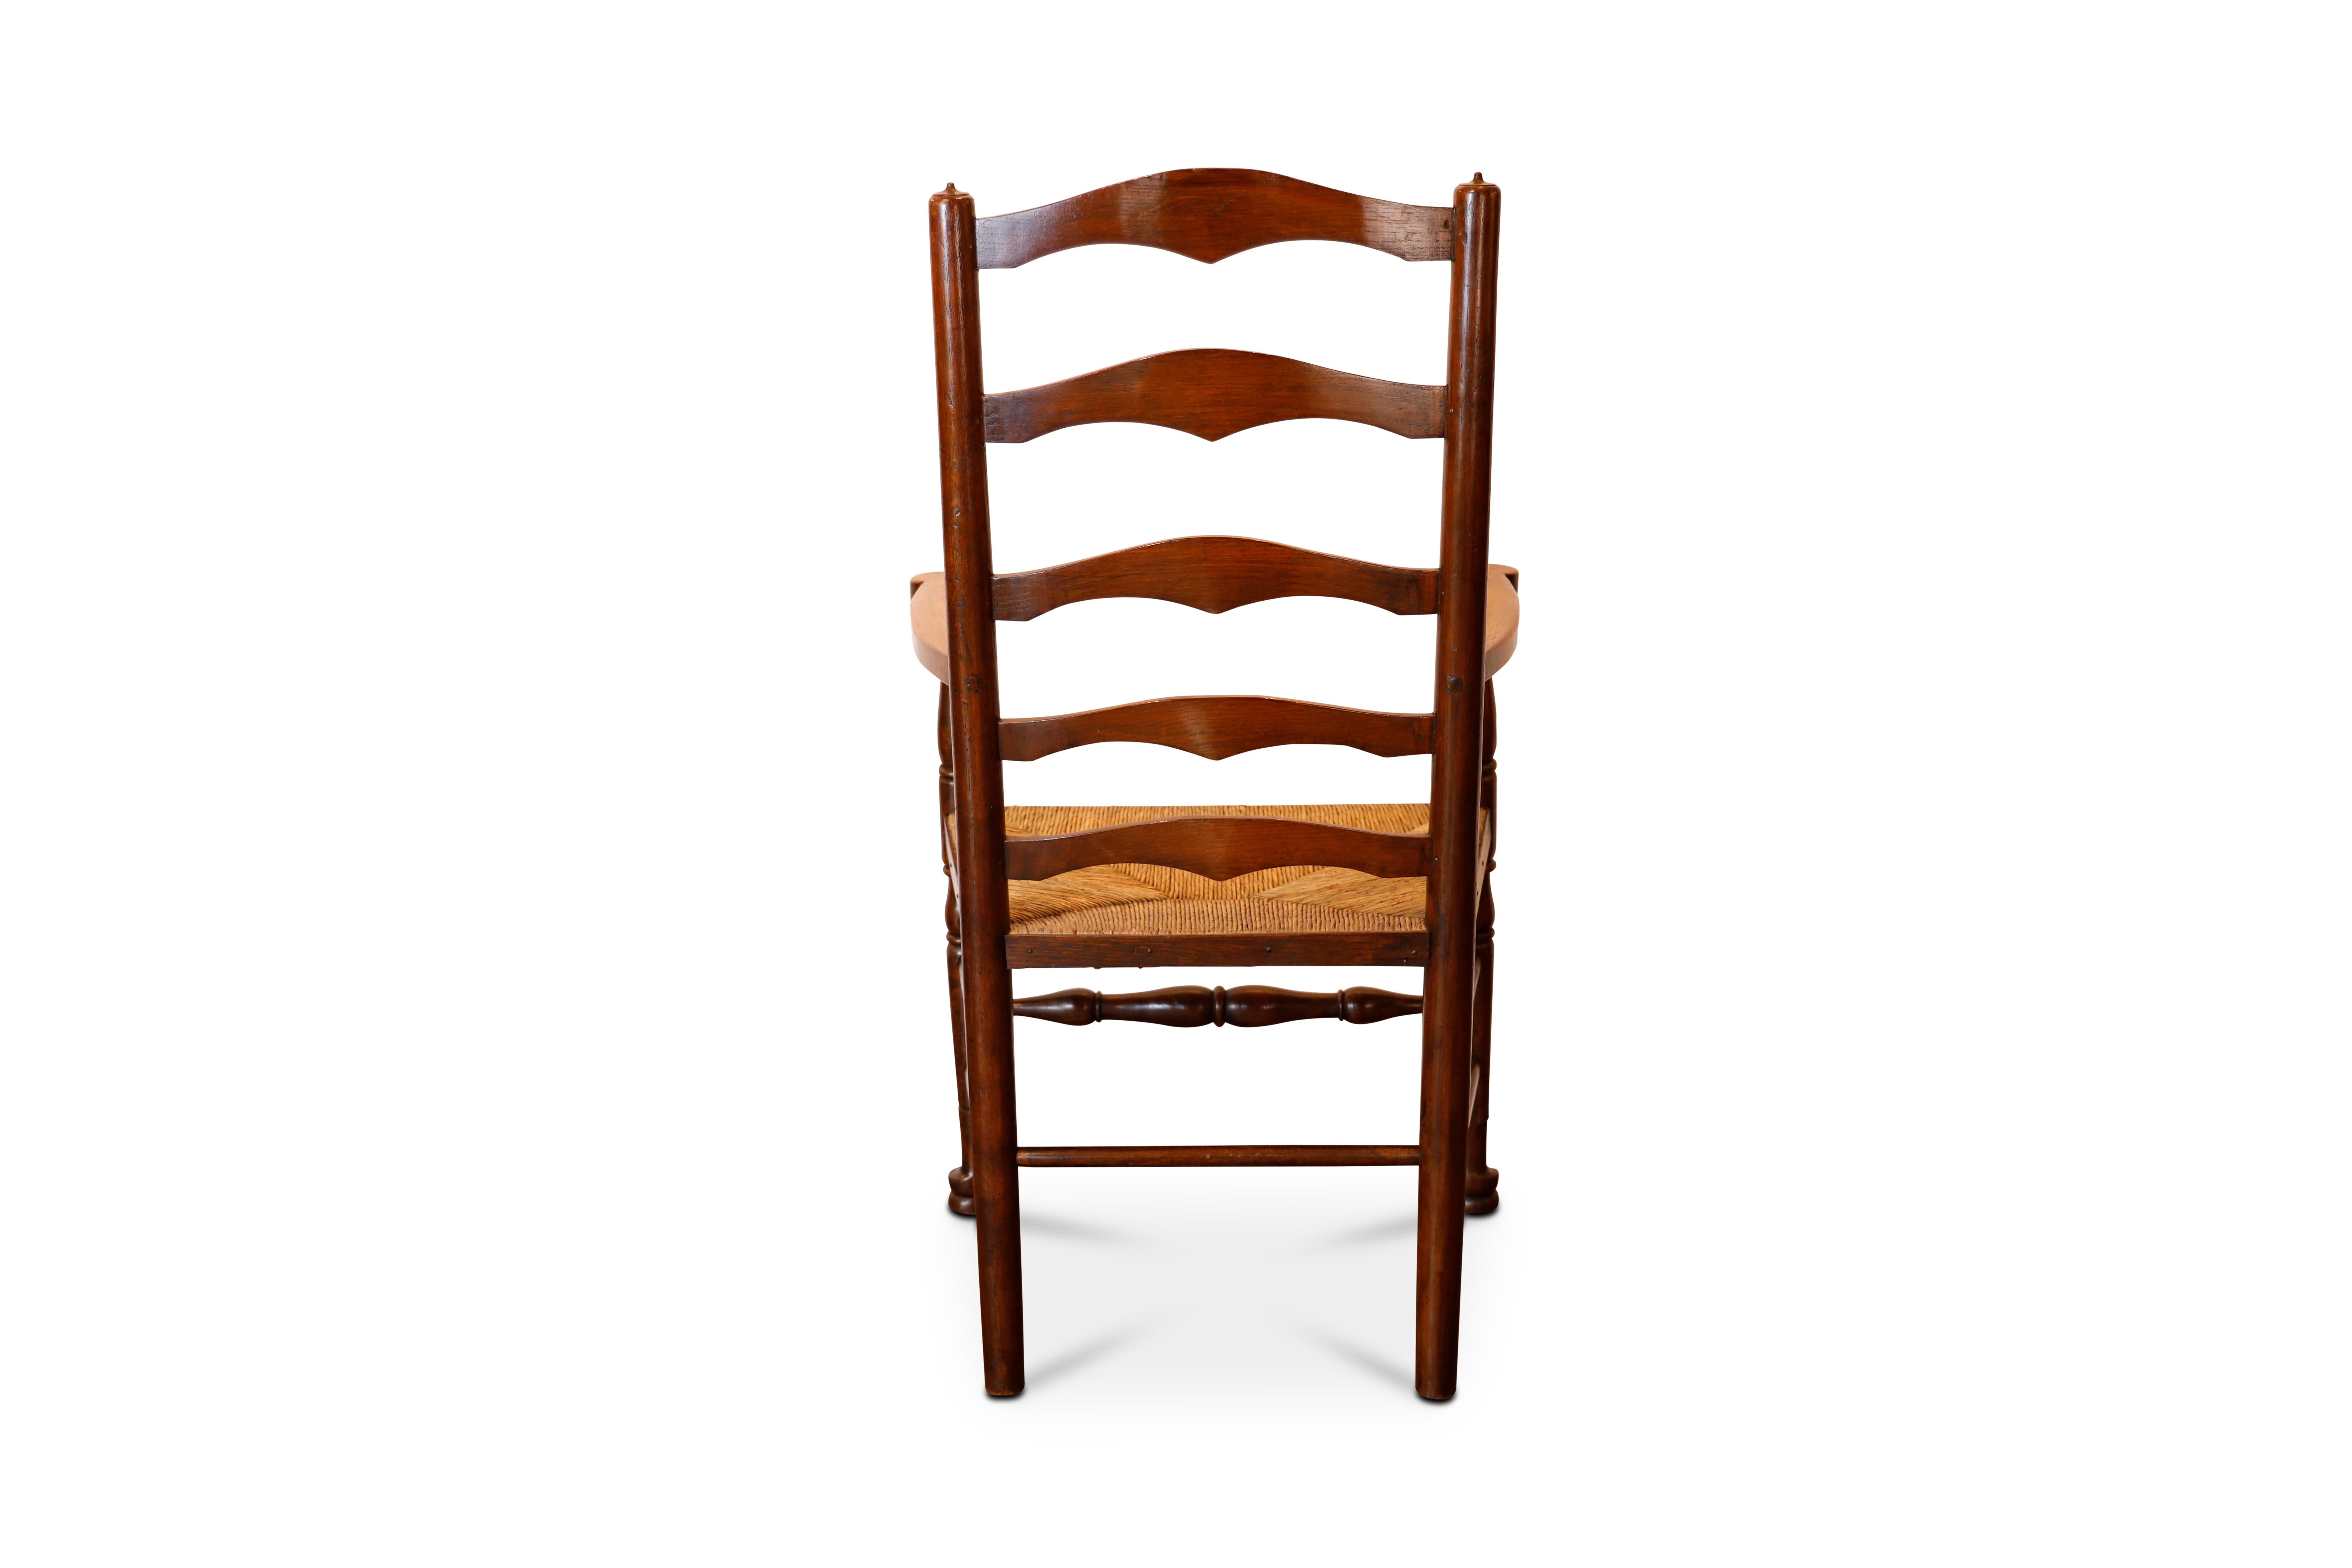 Late 19th c. English oak ladder back chairs with rush seats and turned stretchers.   2 arms, 6 sides.